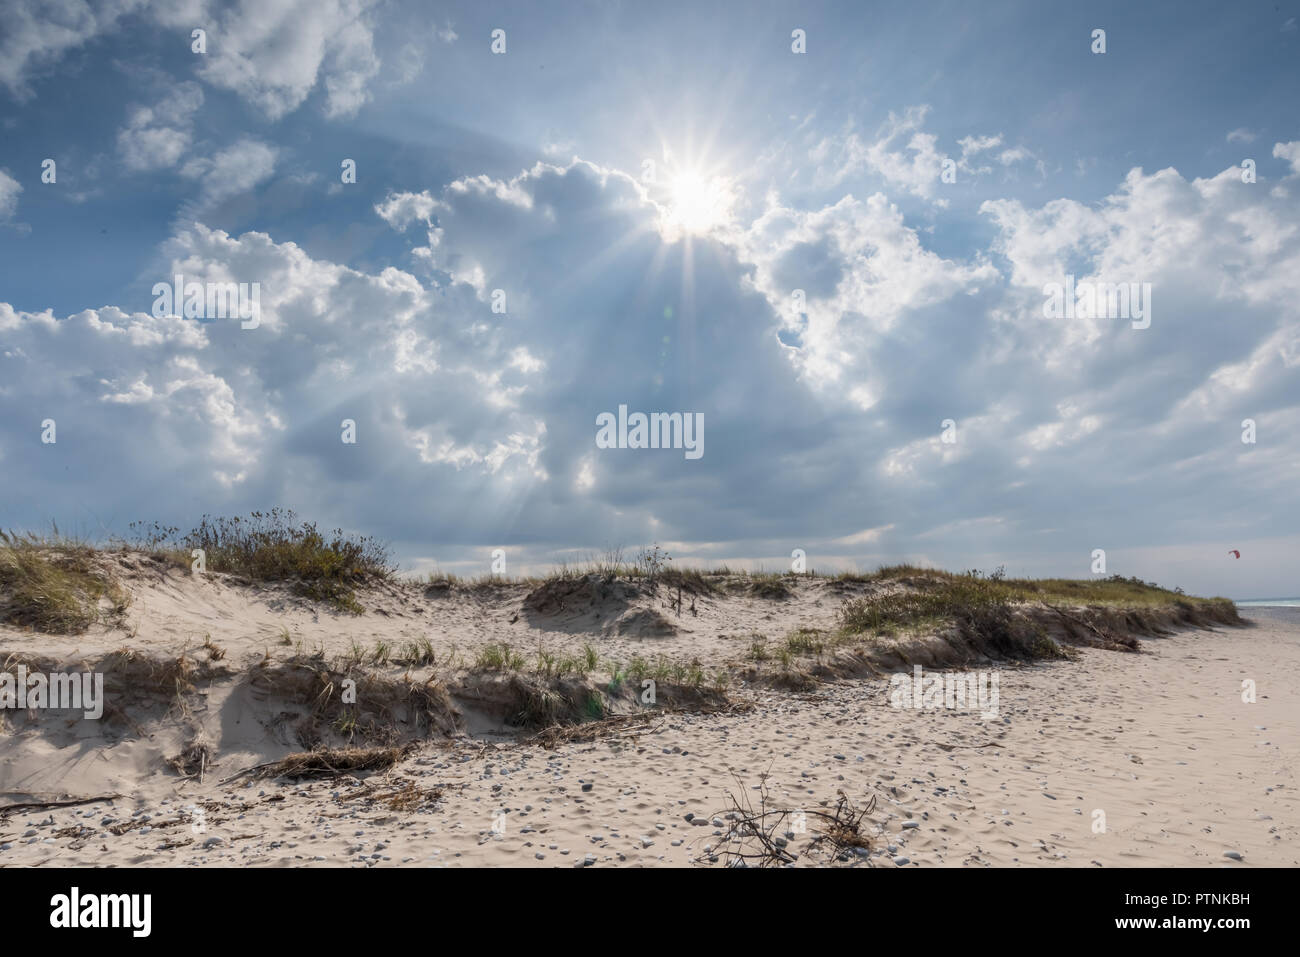 Sunburst coming out of the clouds over sand dunes. Stock Photo